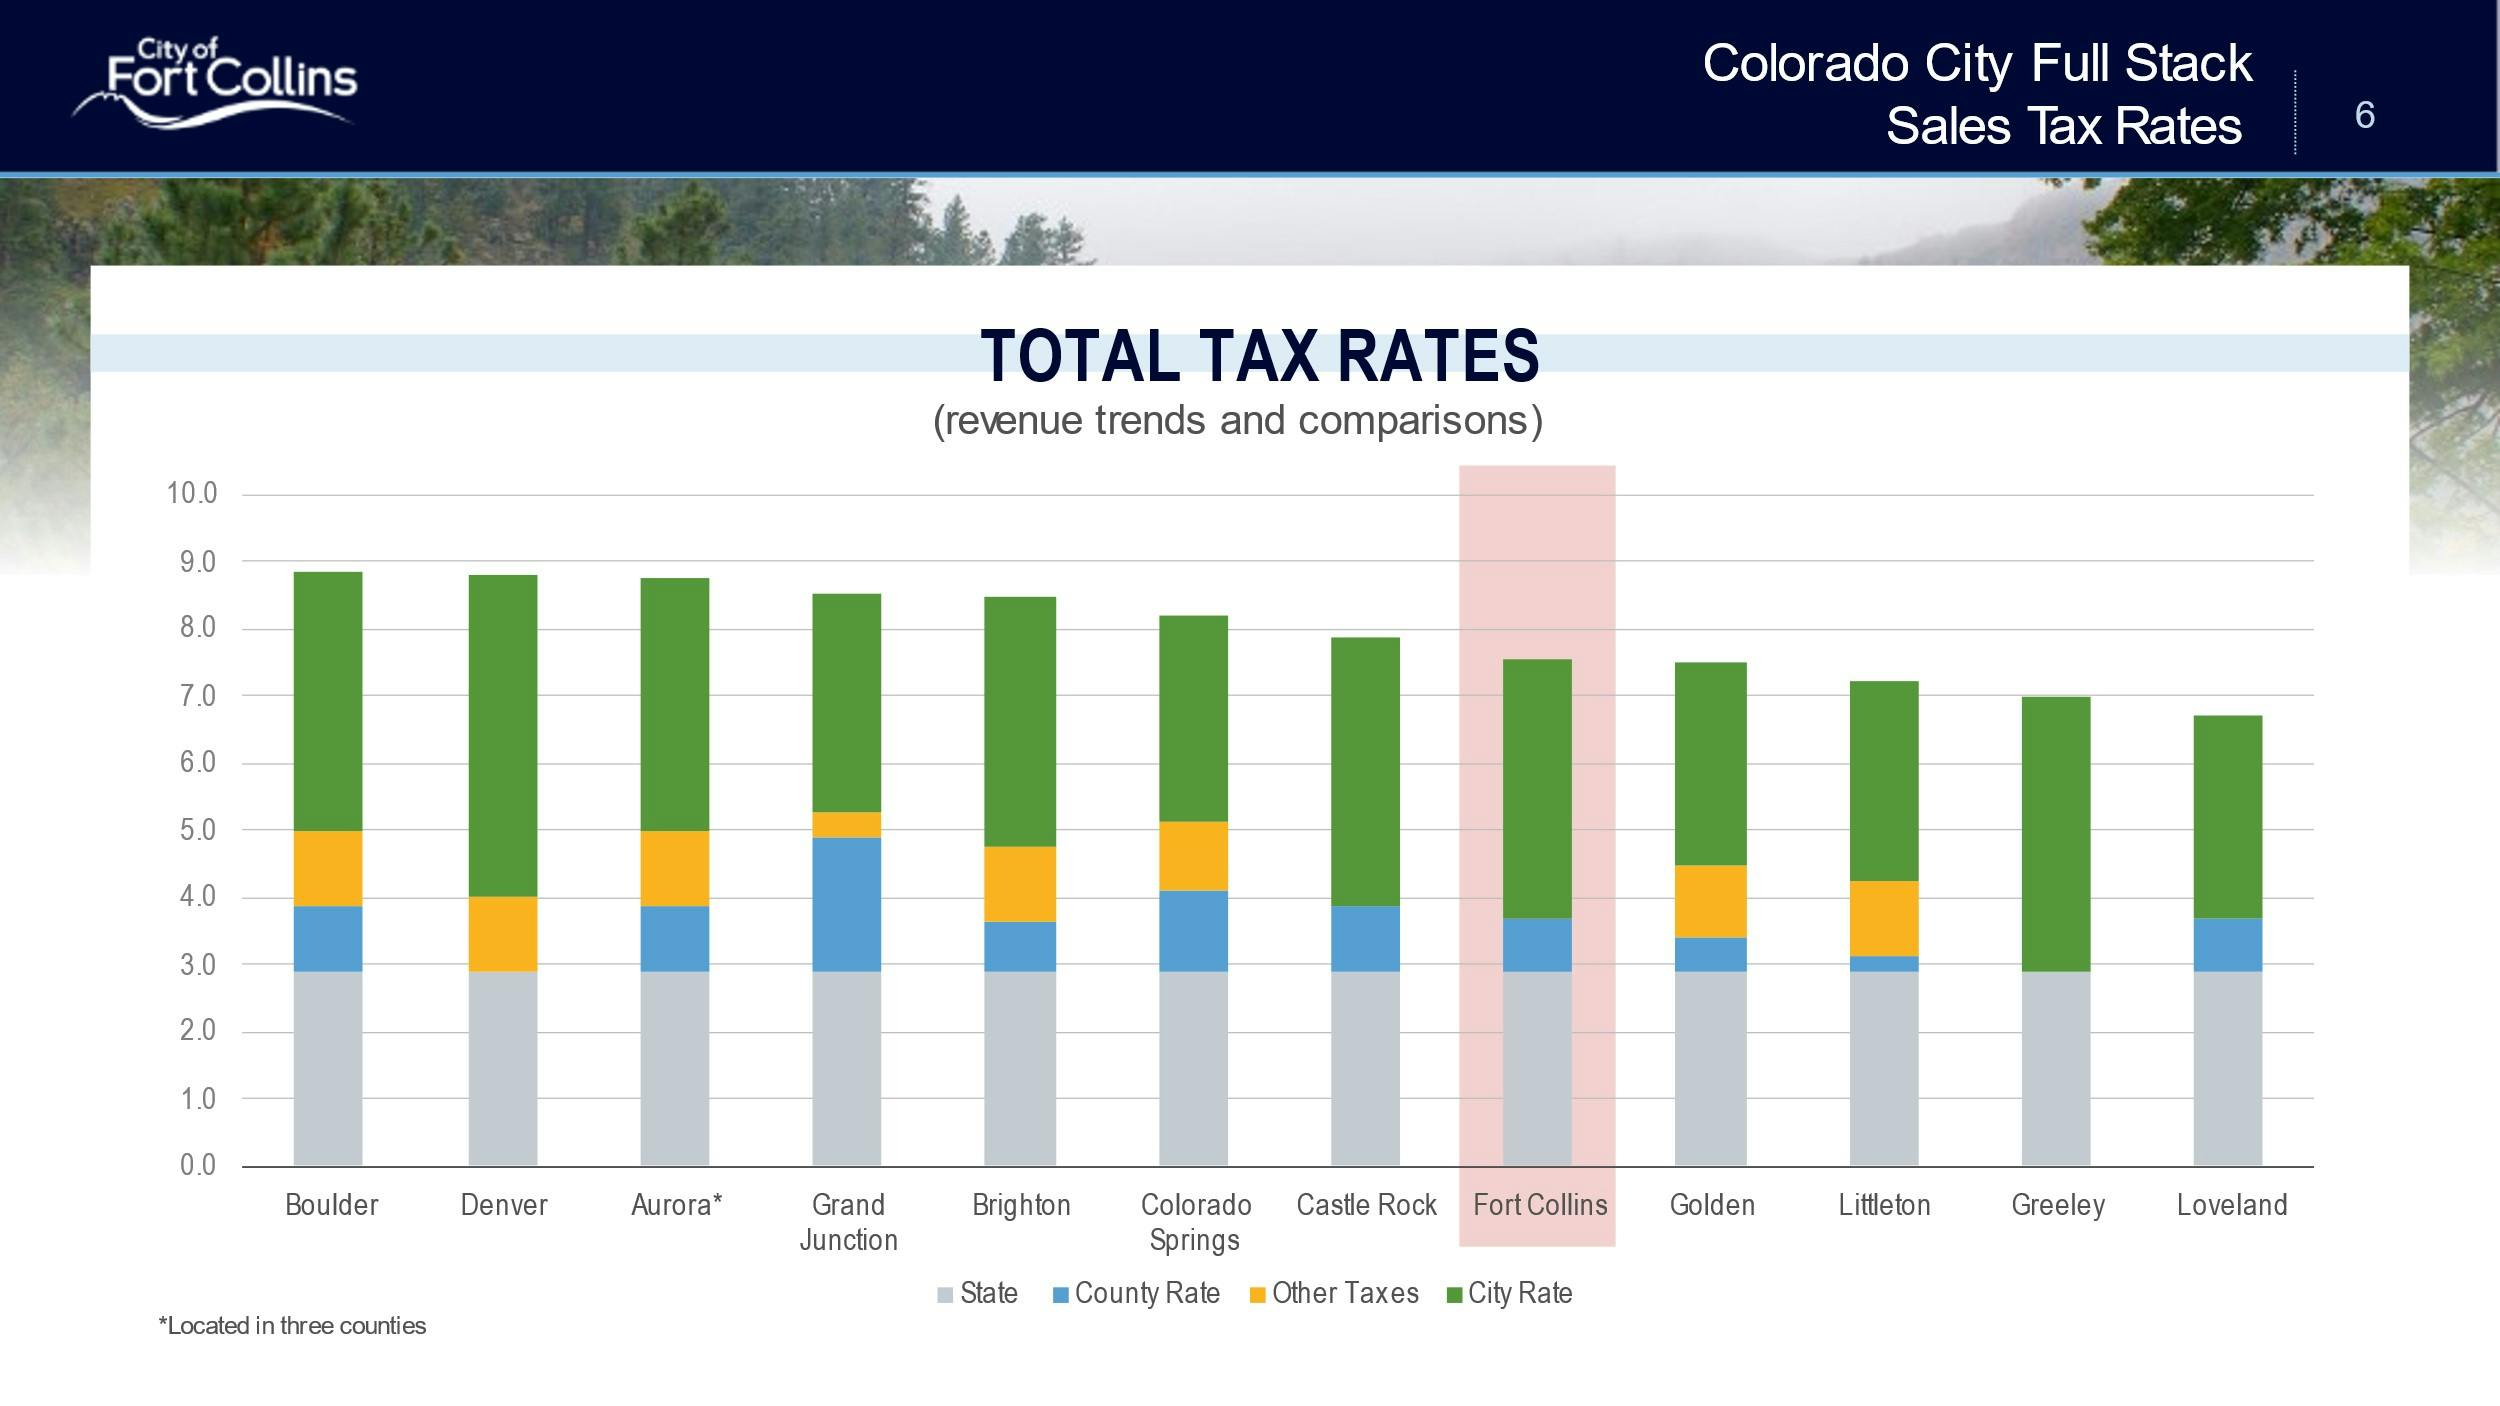 The graph compares total tax rates across twelve cities in Northern Colorado. Fort Collins is on the lower end of the rankings. All counties except Douglas and Larimer have other taxes linked to transportation, culture and public safety.